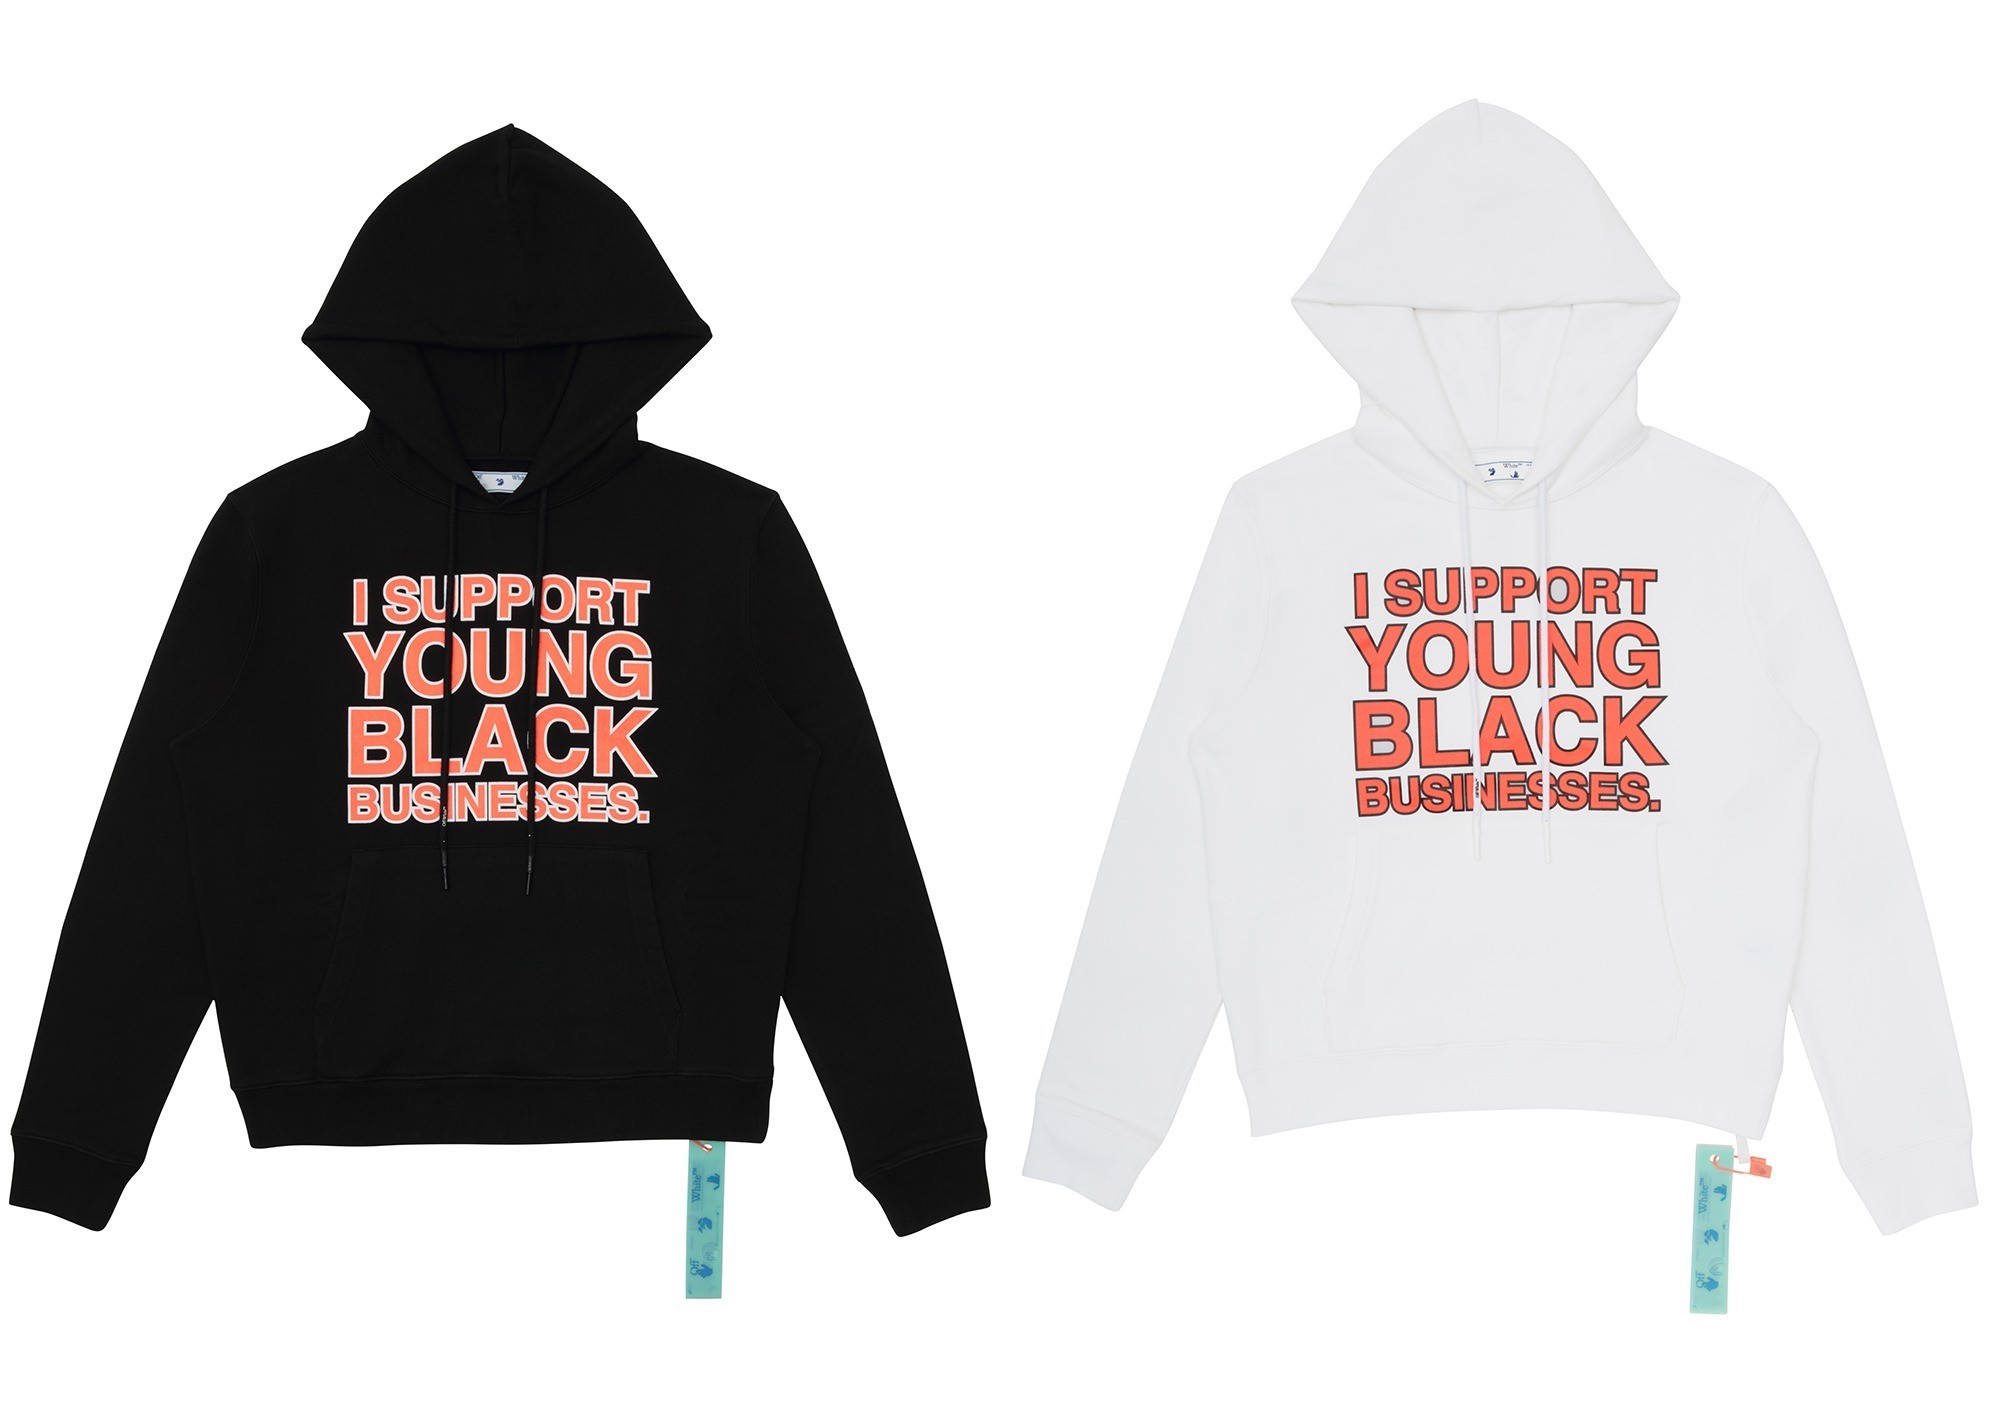 Off-White's Virgil Abloh & Stüssy Team Up For I Support Young Black  Businesses Initiative Phase 2